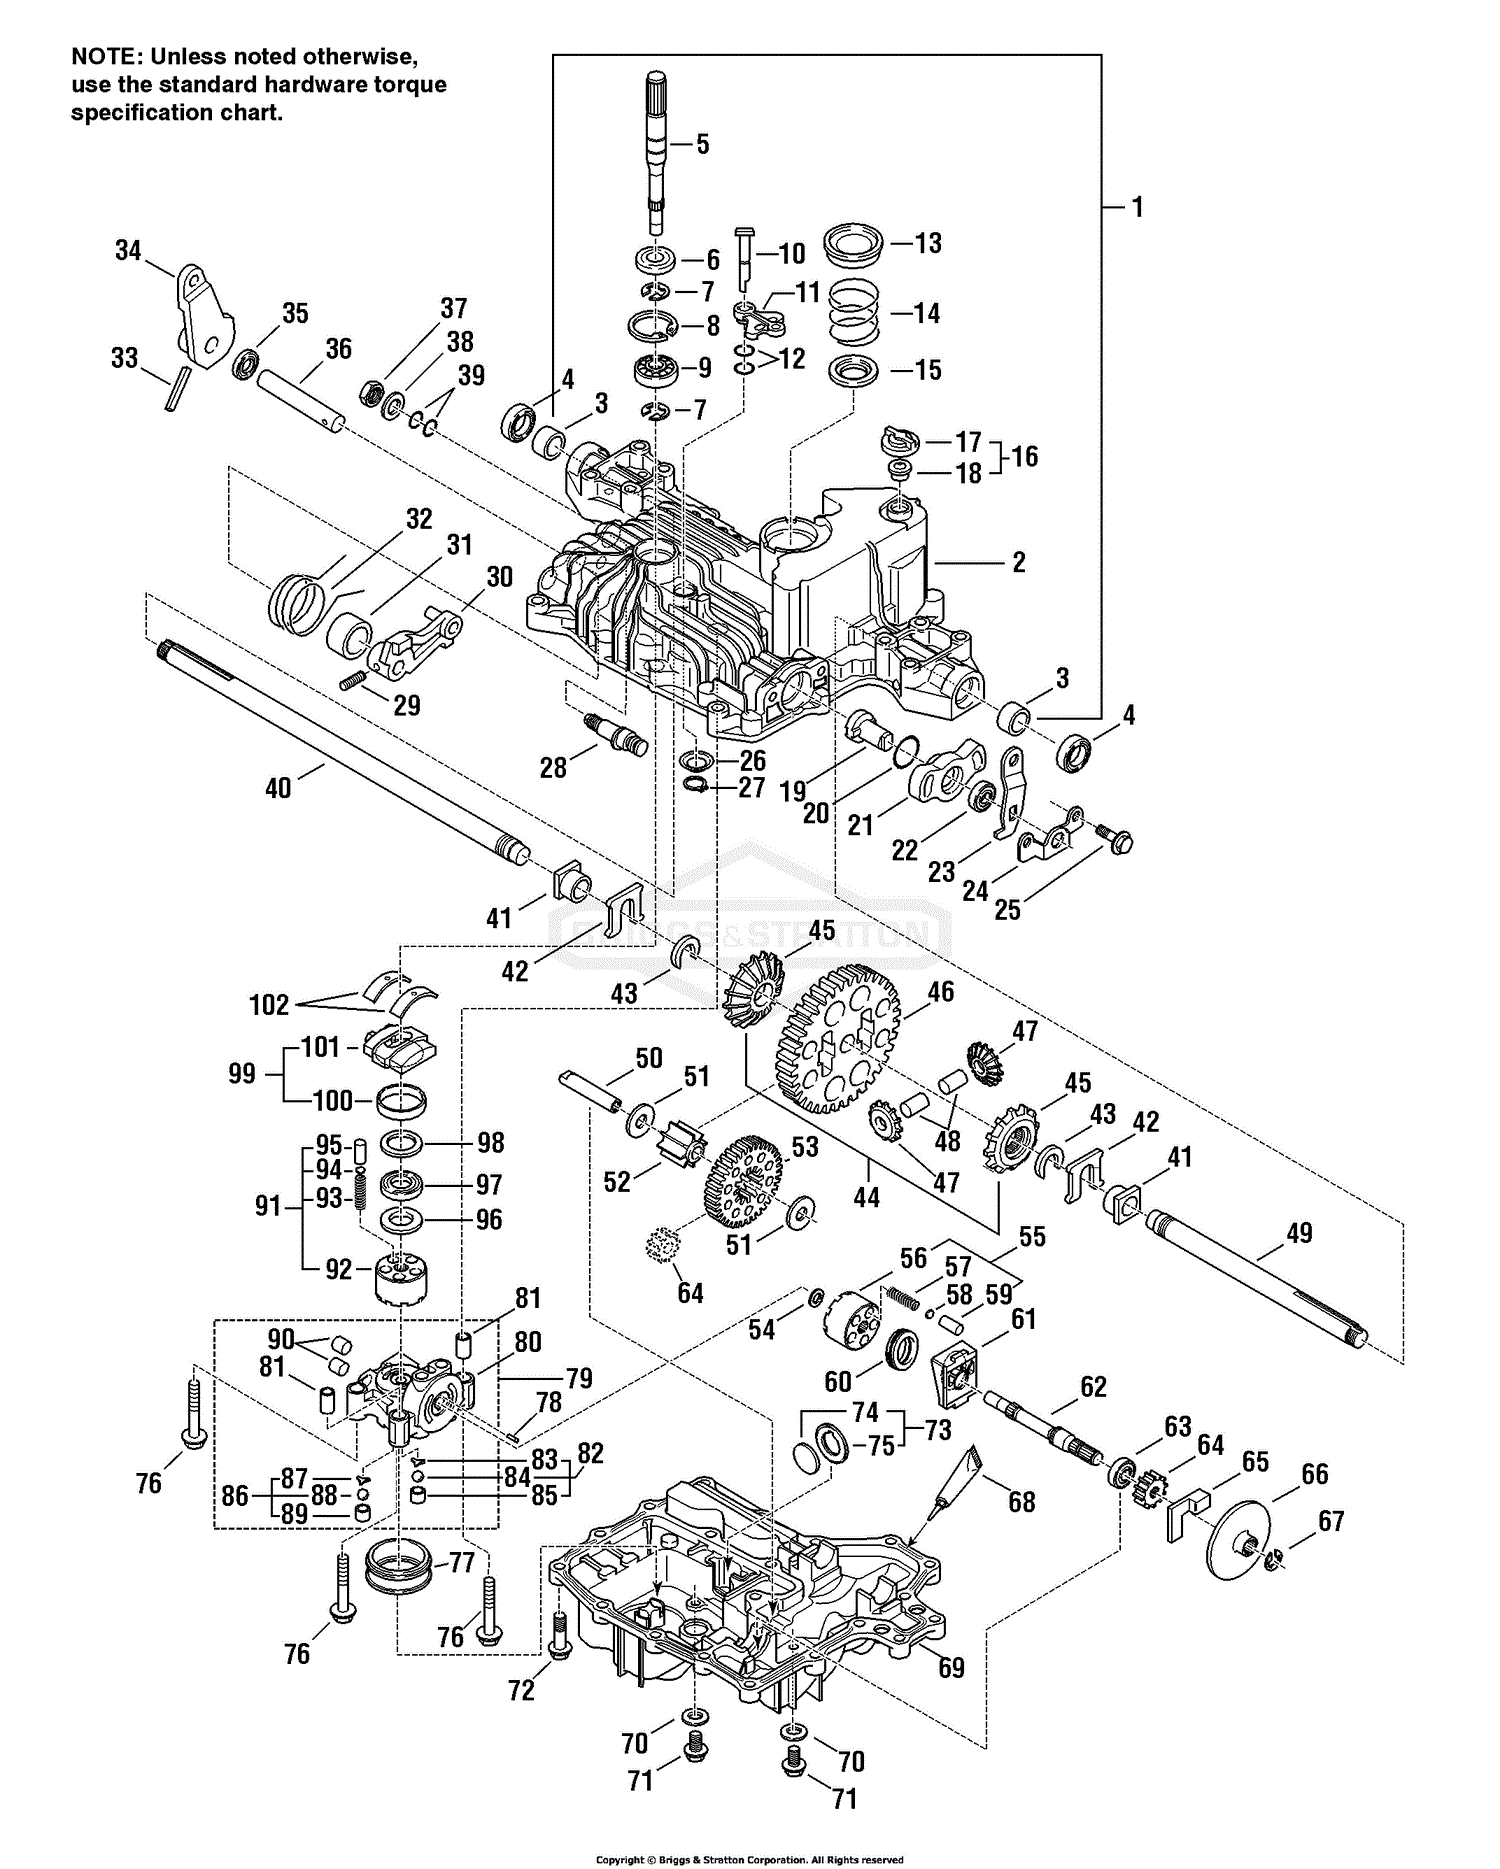 Wiring Diagram For P1000 Motorcycle from az417944.vo.msecnd.net